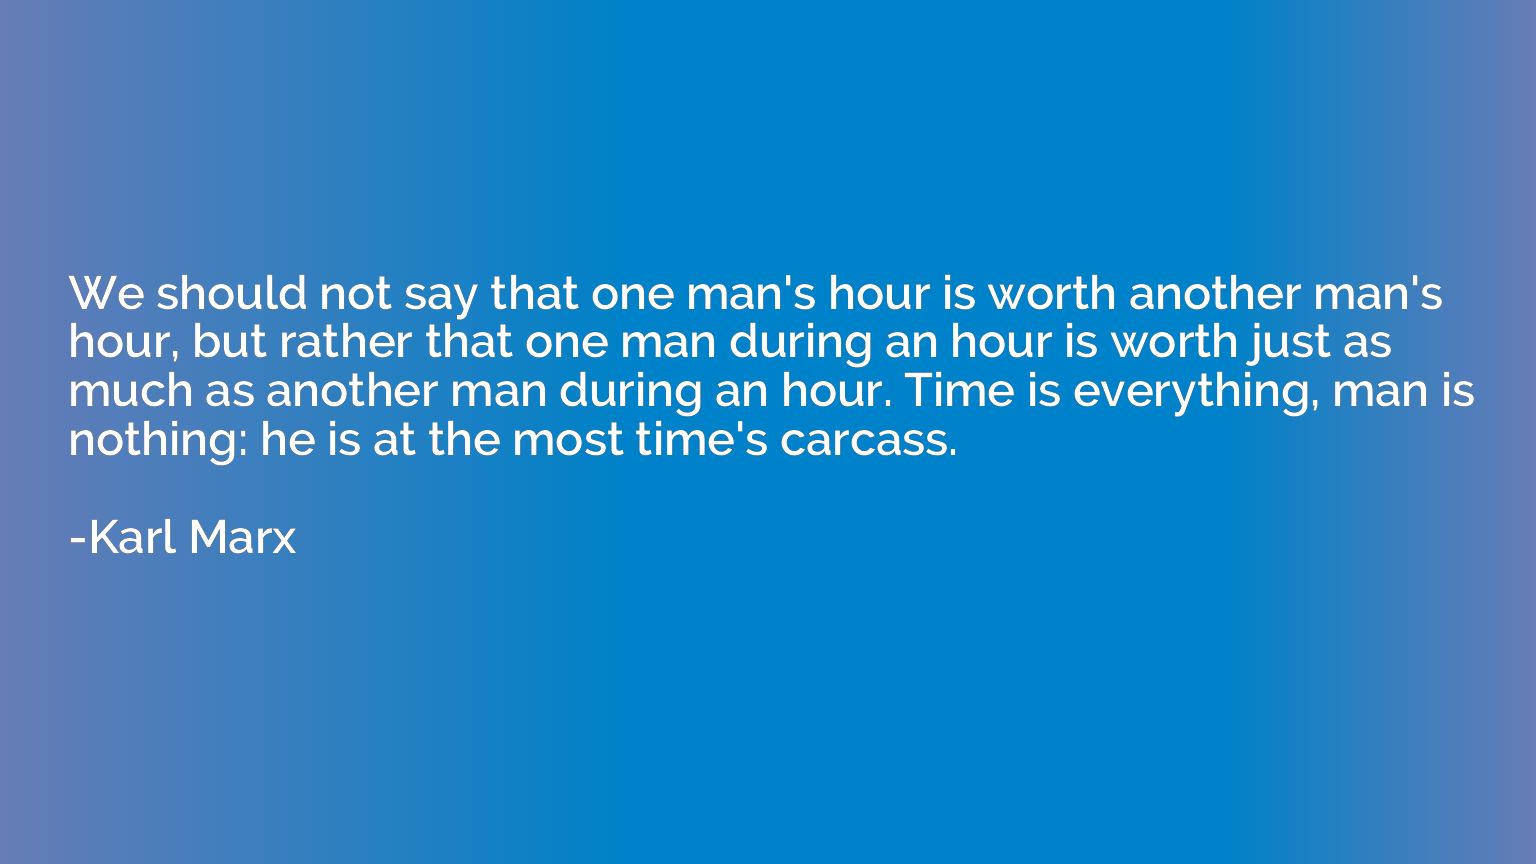 We should not say that one man's hour is worth another man's